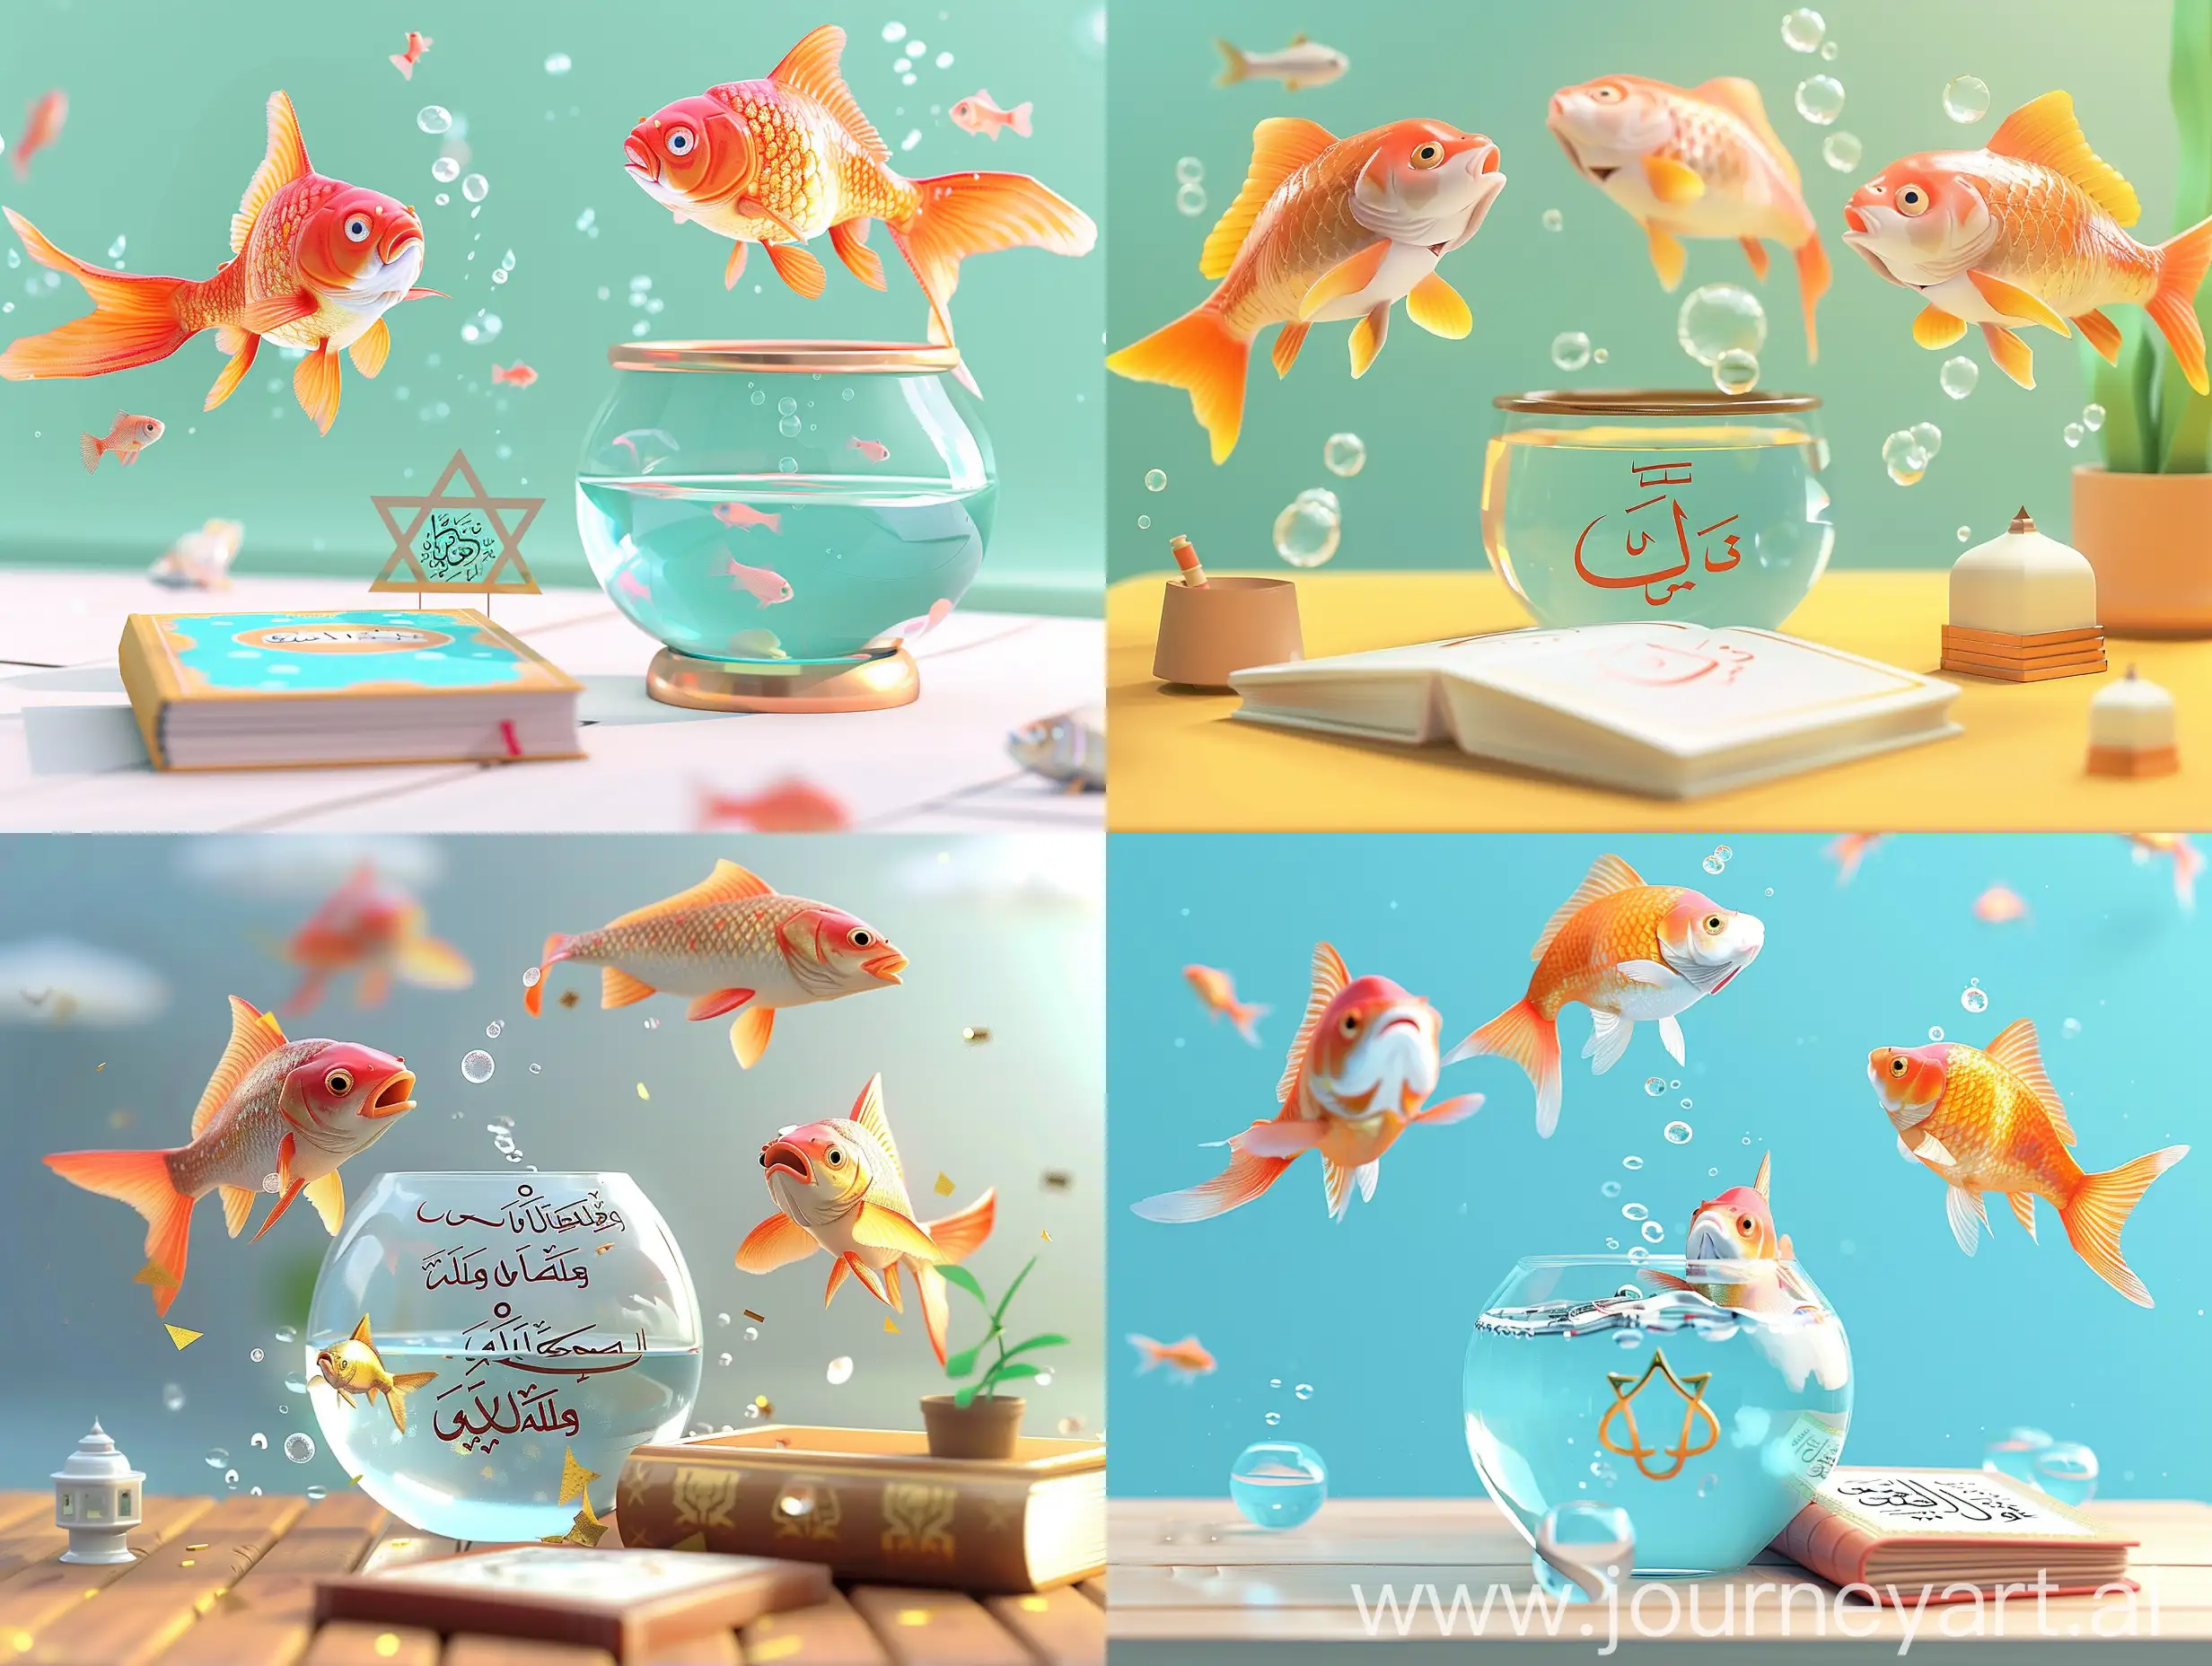 Festive-3D-Cartoon-Redfish-Leaping-from-Fishbowl-with-Quran-and-Ramadan-Symbol